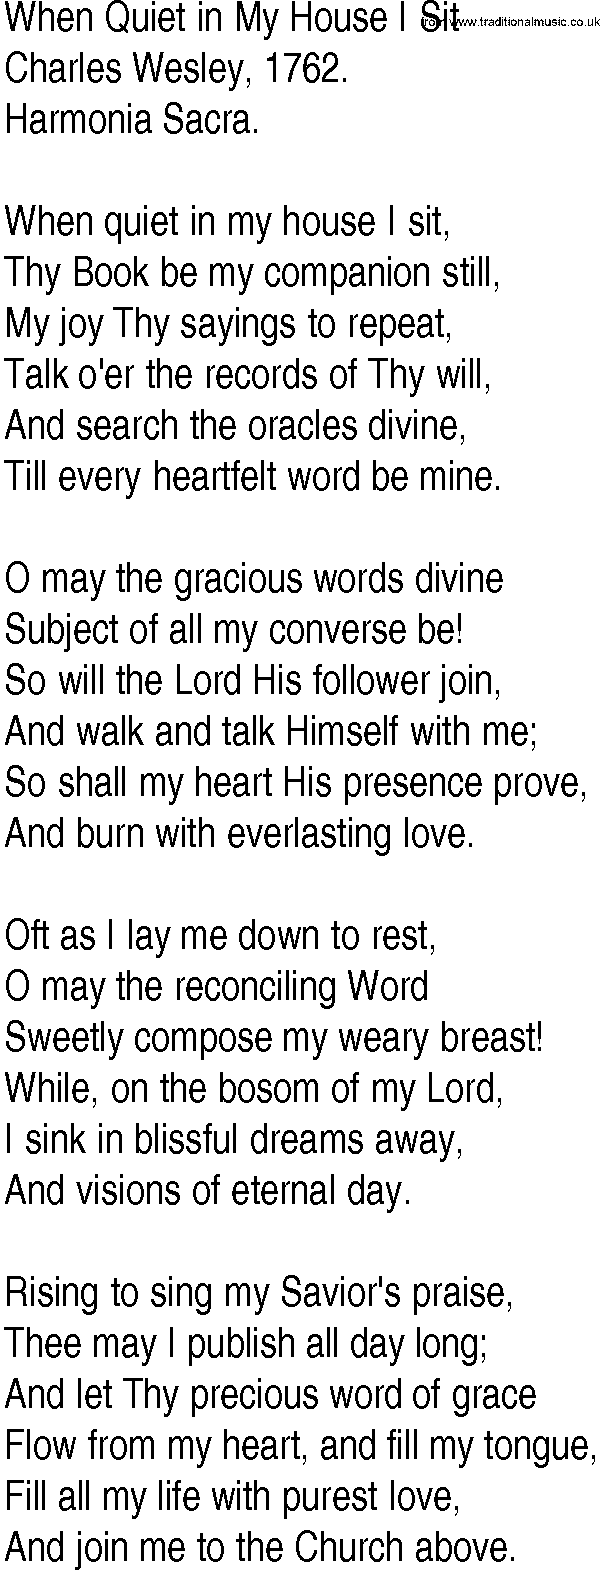 Hymn and Gospel Song: When Quiet in My House I Sit by Charles Wesley lyrics